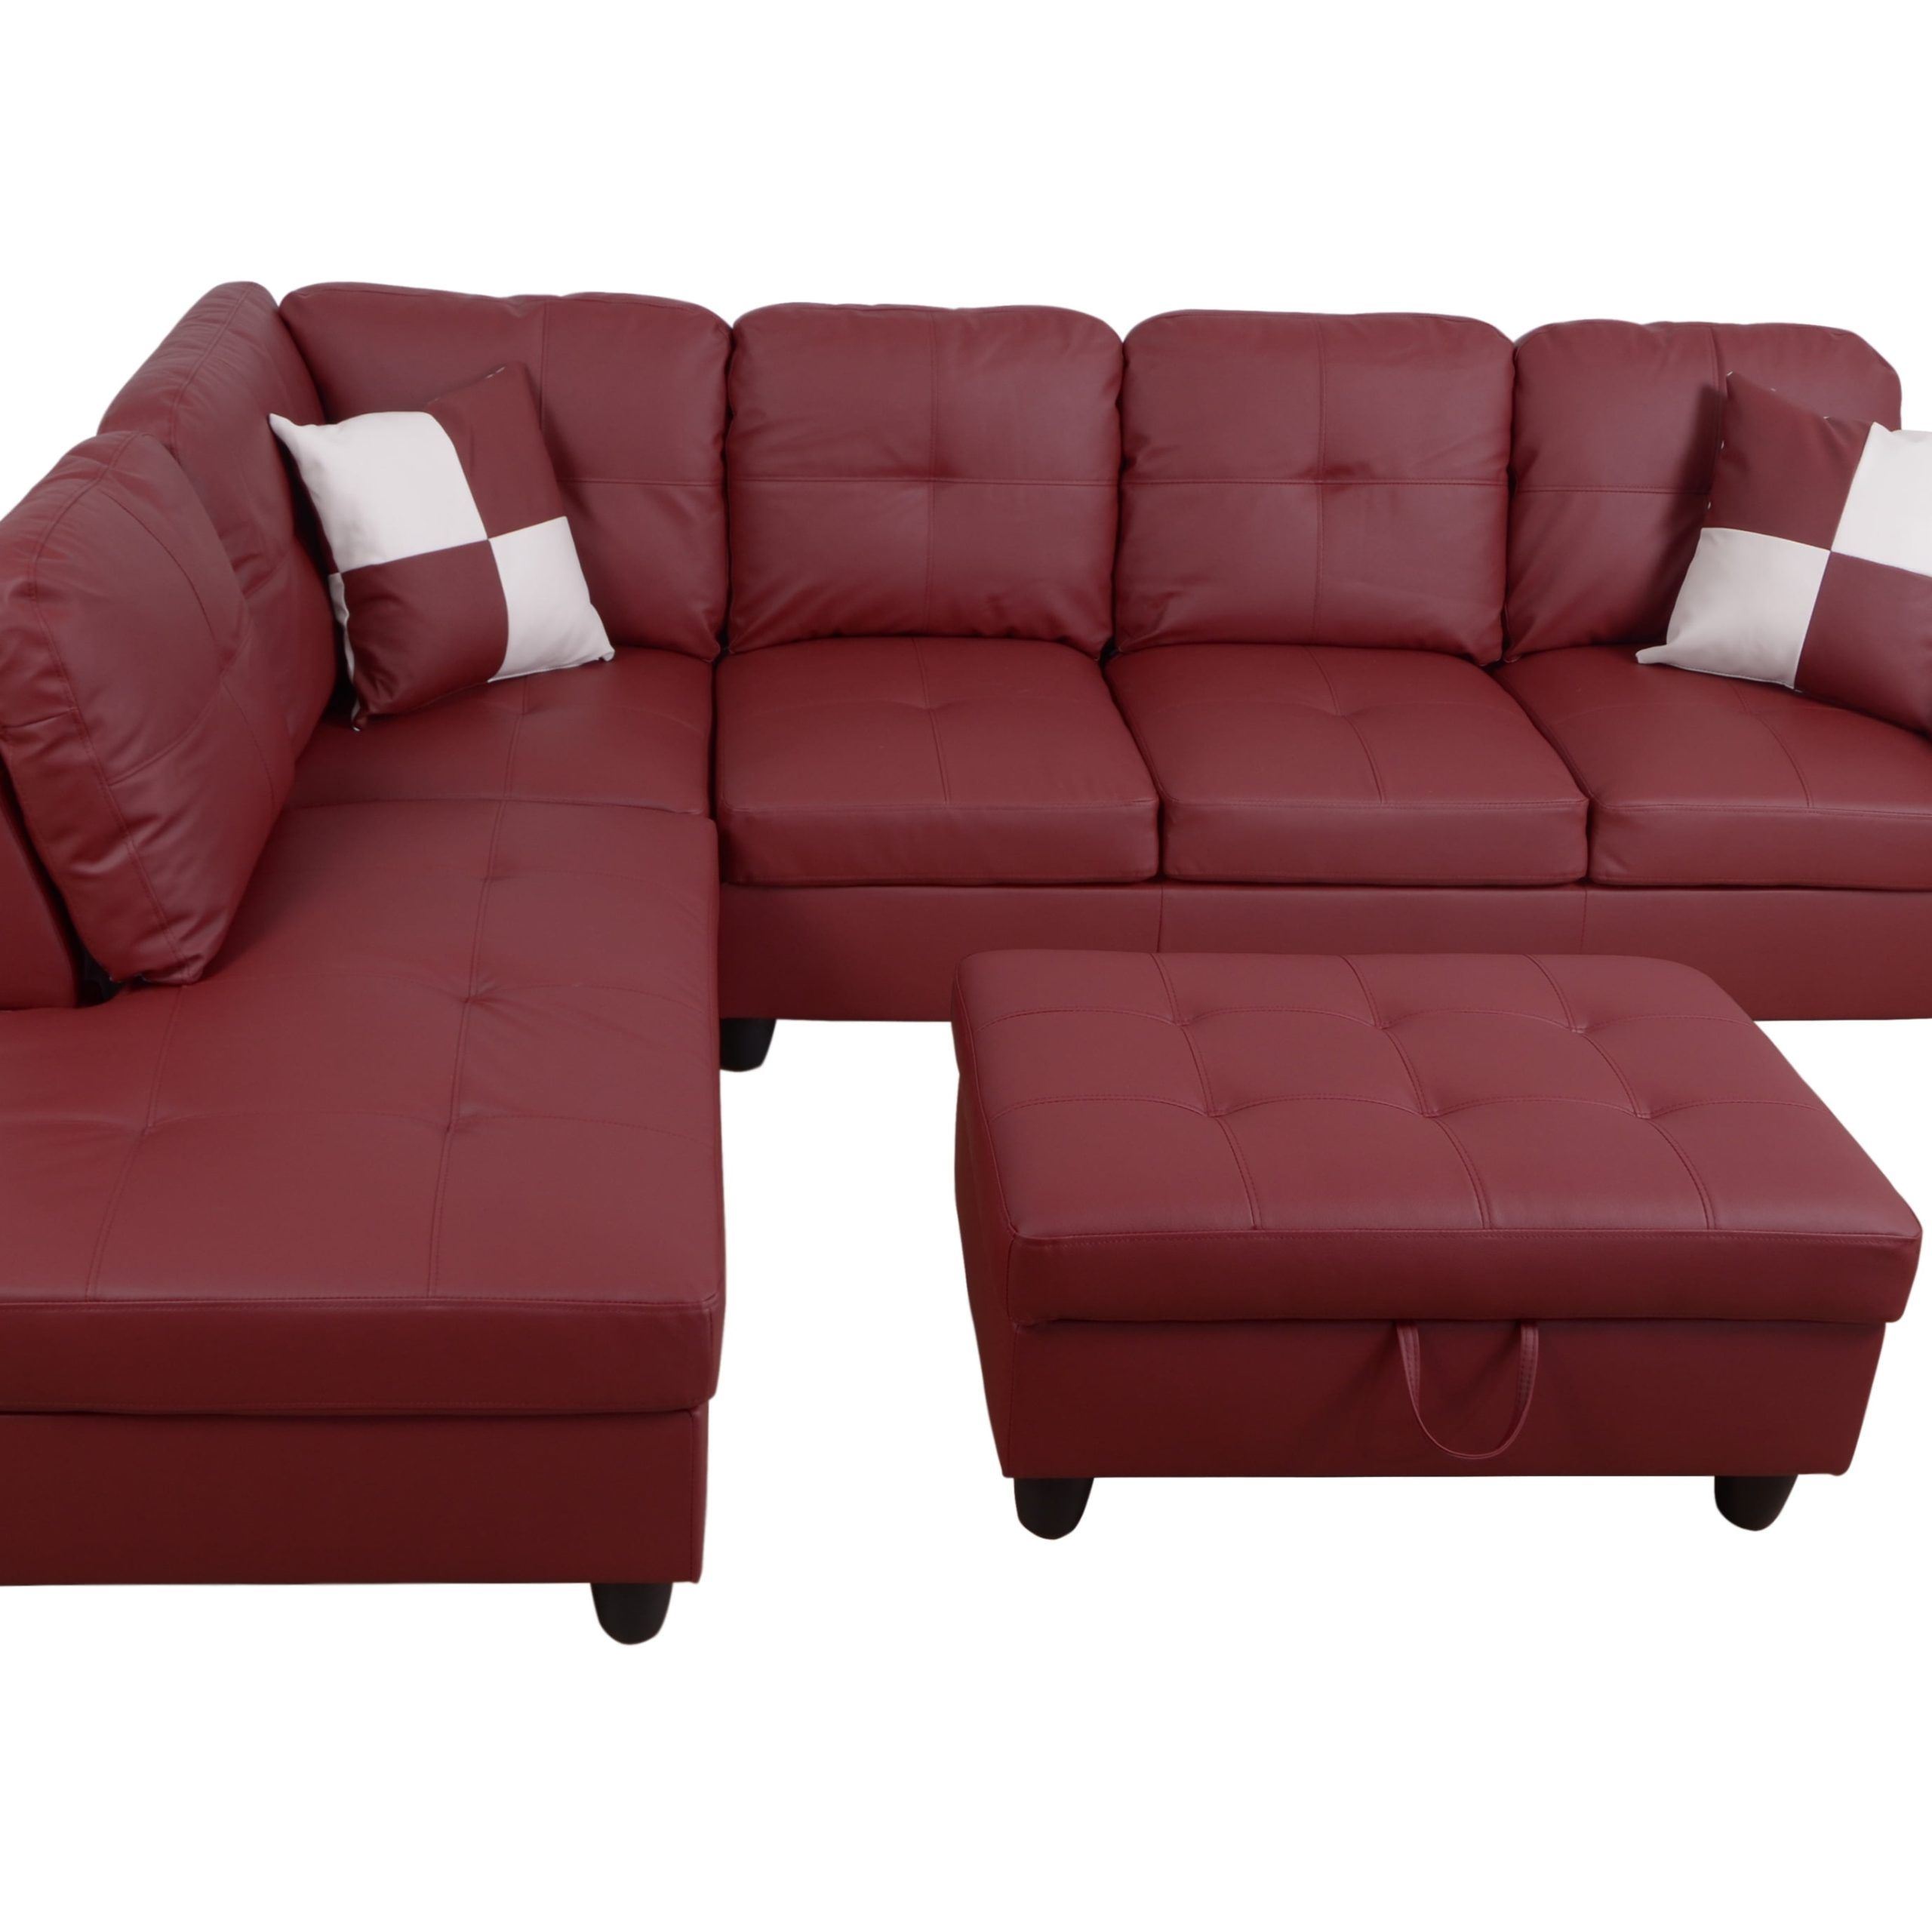 Faux Leather Sectional Sofa Sets Regarding Well Liked For U Furnishing Classic Red Faux Leather Sectional Sofa, Right Facing (View 13 of 15)